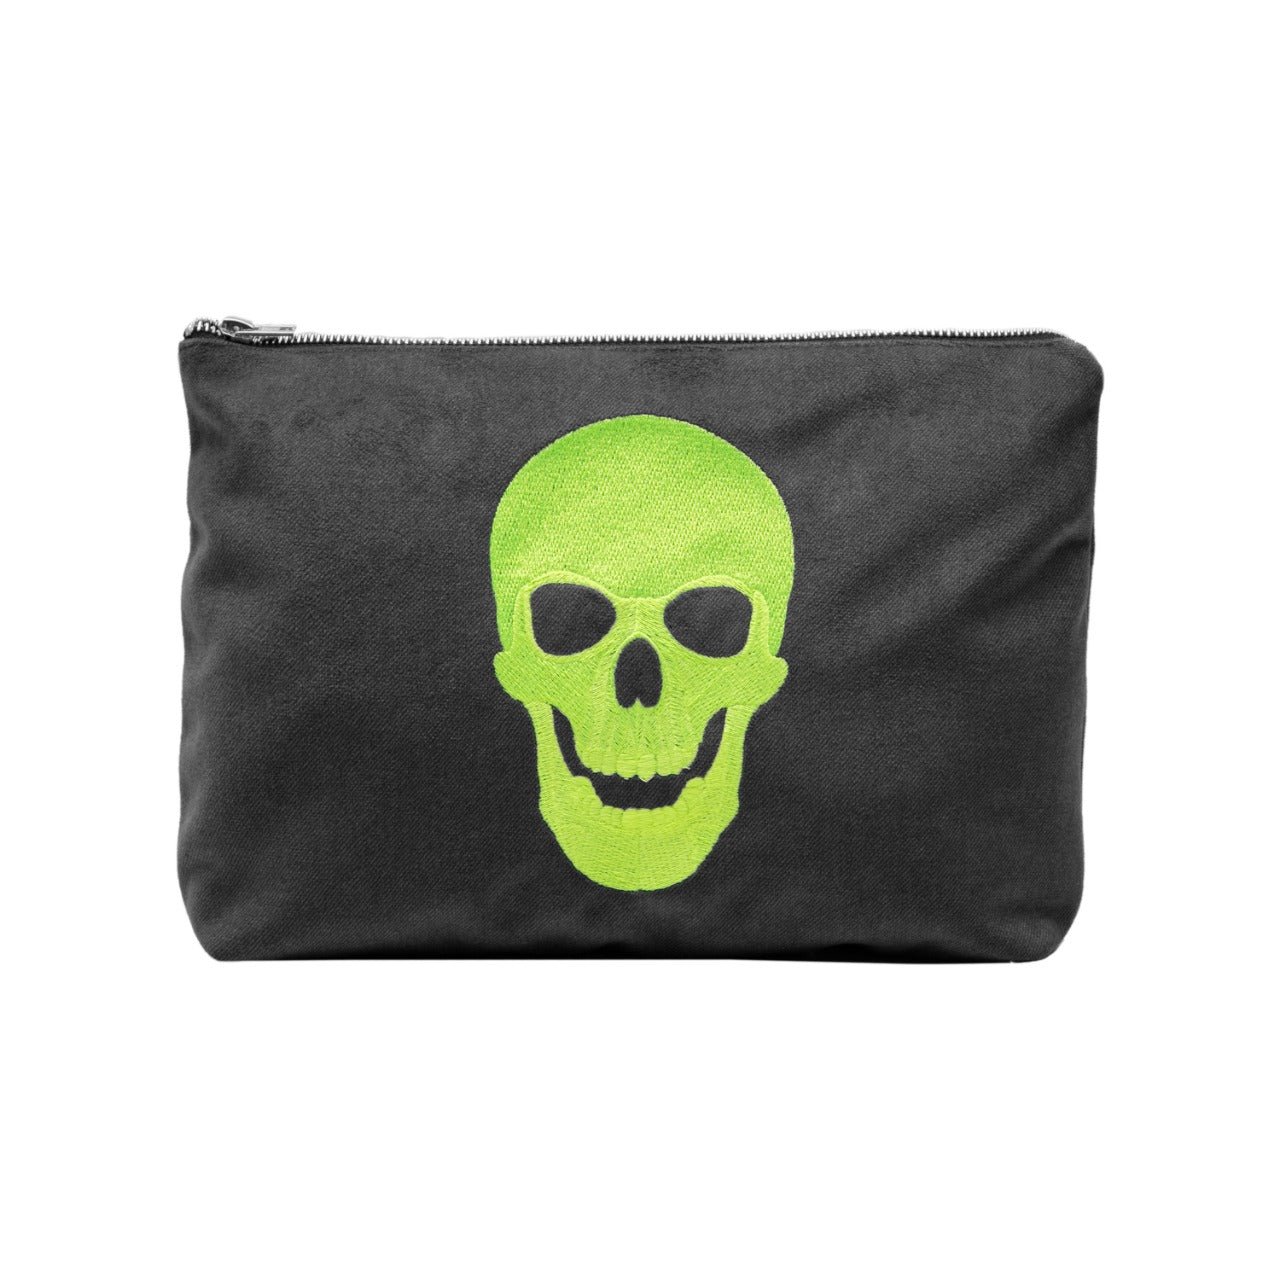 EMBROIDERED YELLOW HIGHLIGHTHER SKULL CLUTCH